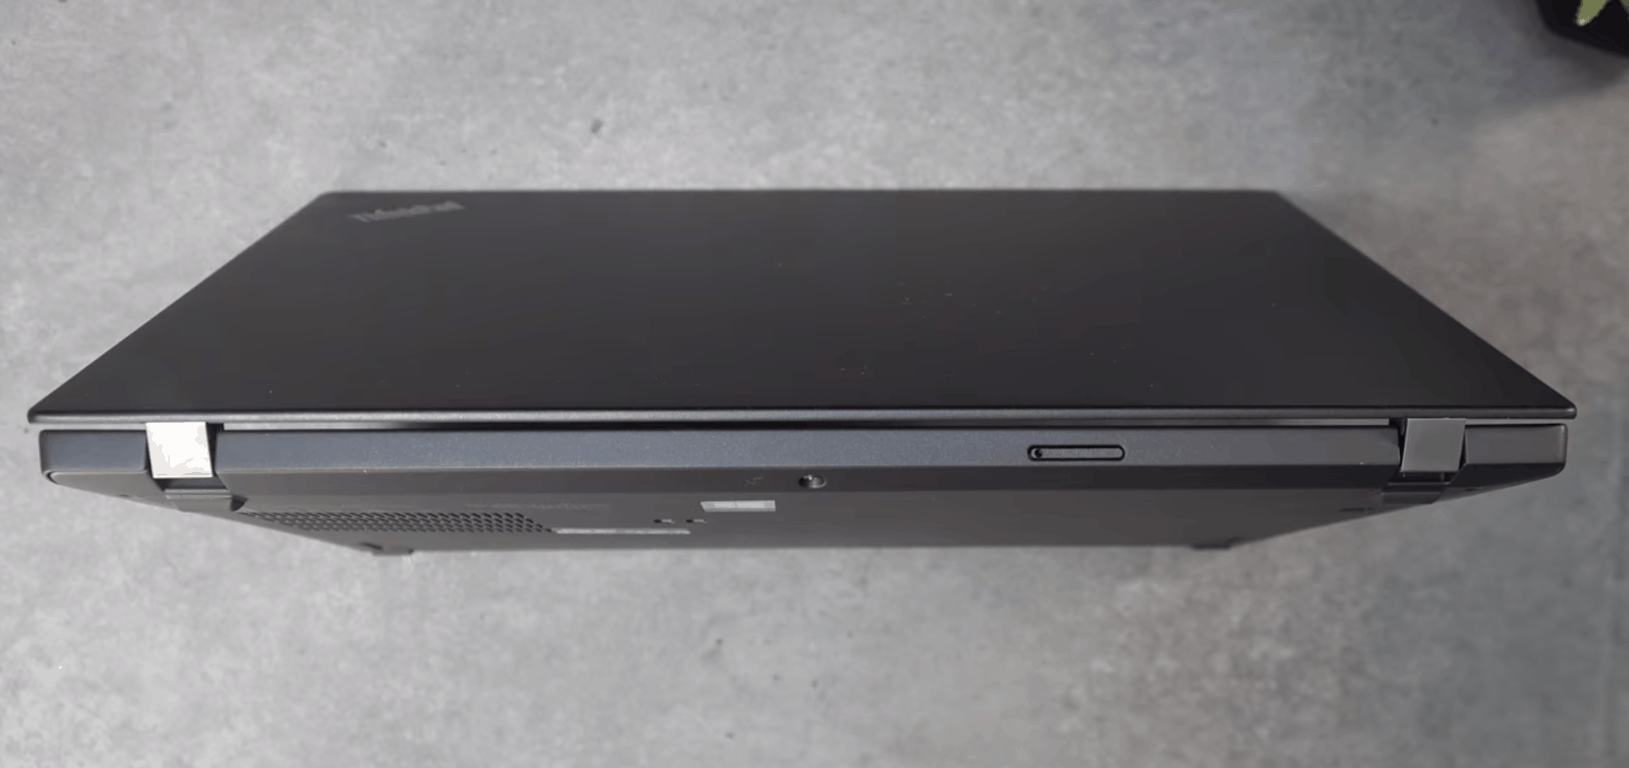 Lenovo ThinkPad X390: Lenovo muddies the waters with an upgraded screen size - OnMSFT.com - July 10, 2019